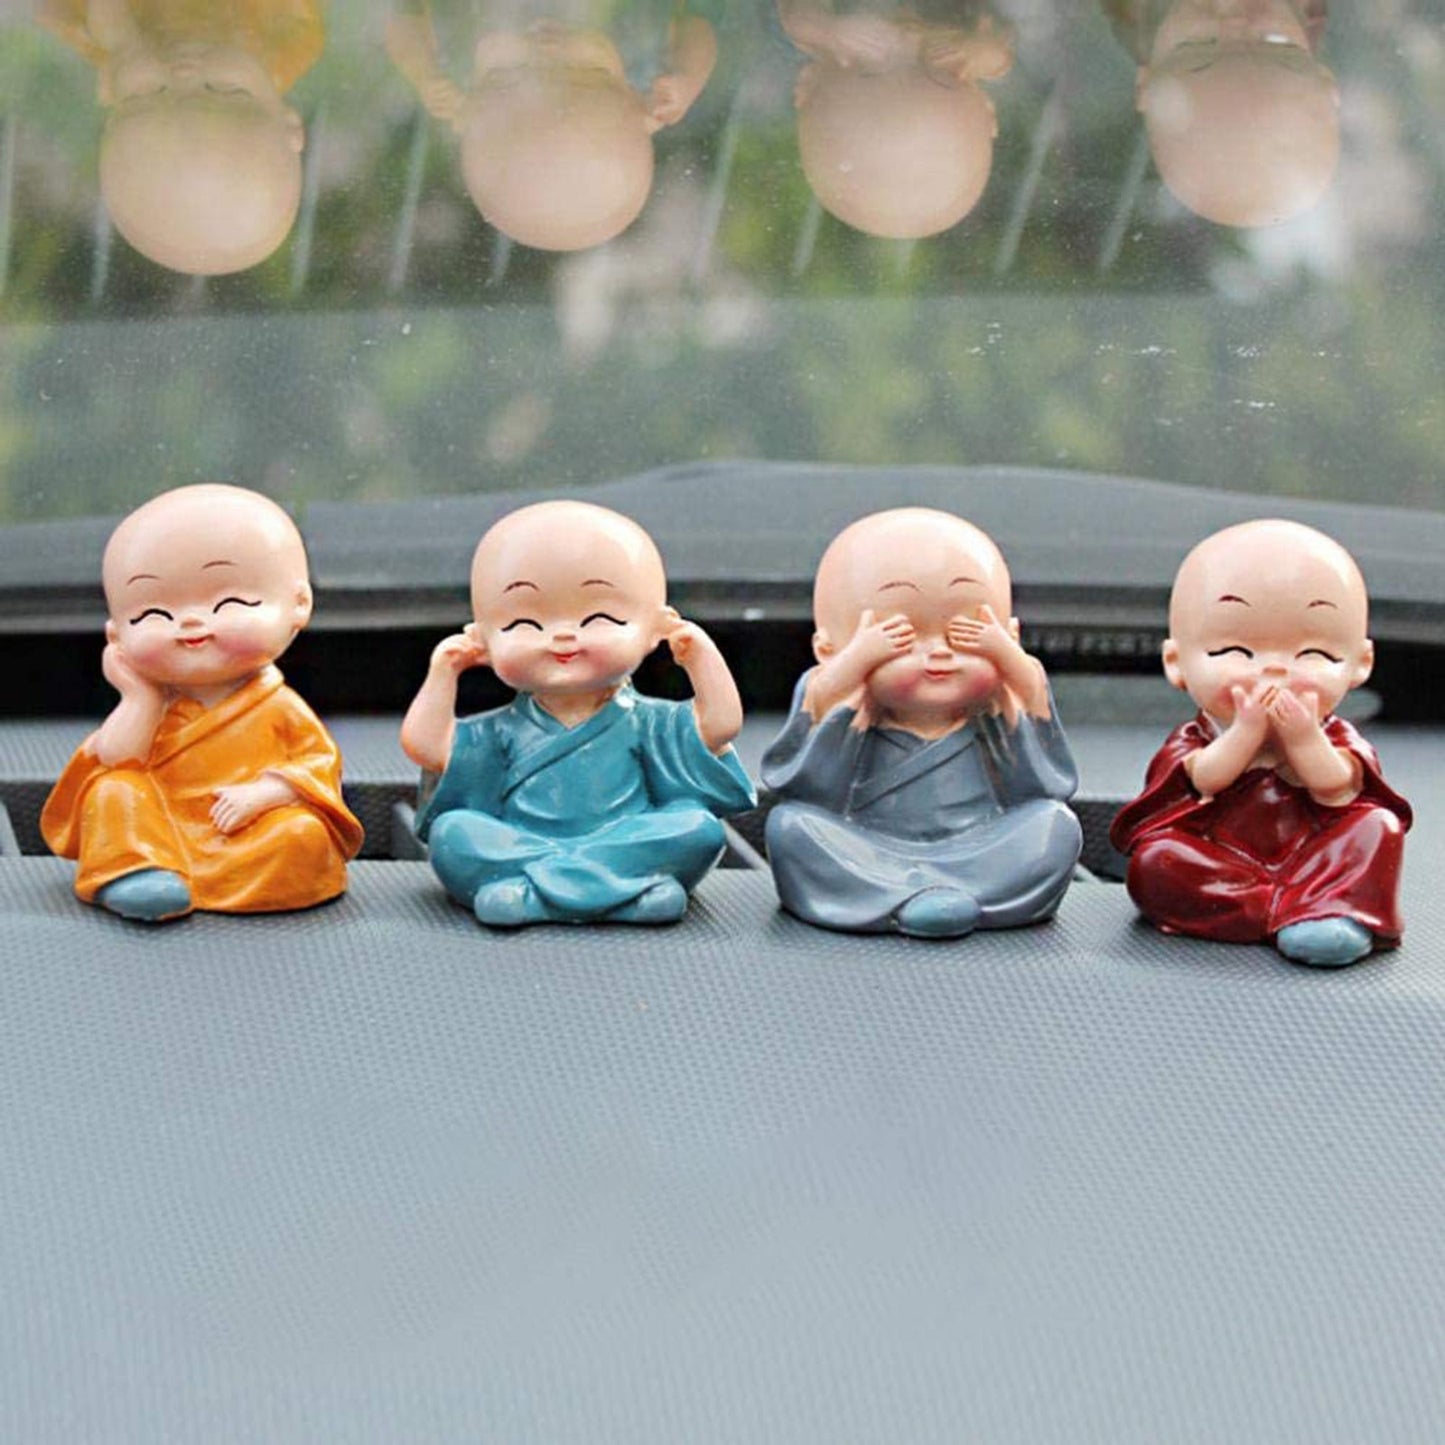 4 Piece Resin Monk Figurines Dimensions As Seen In Pictures